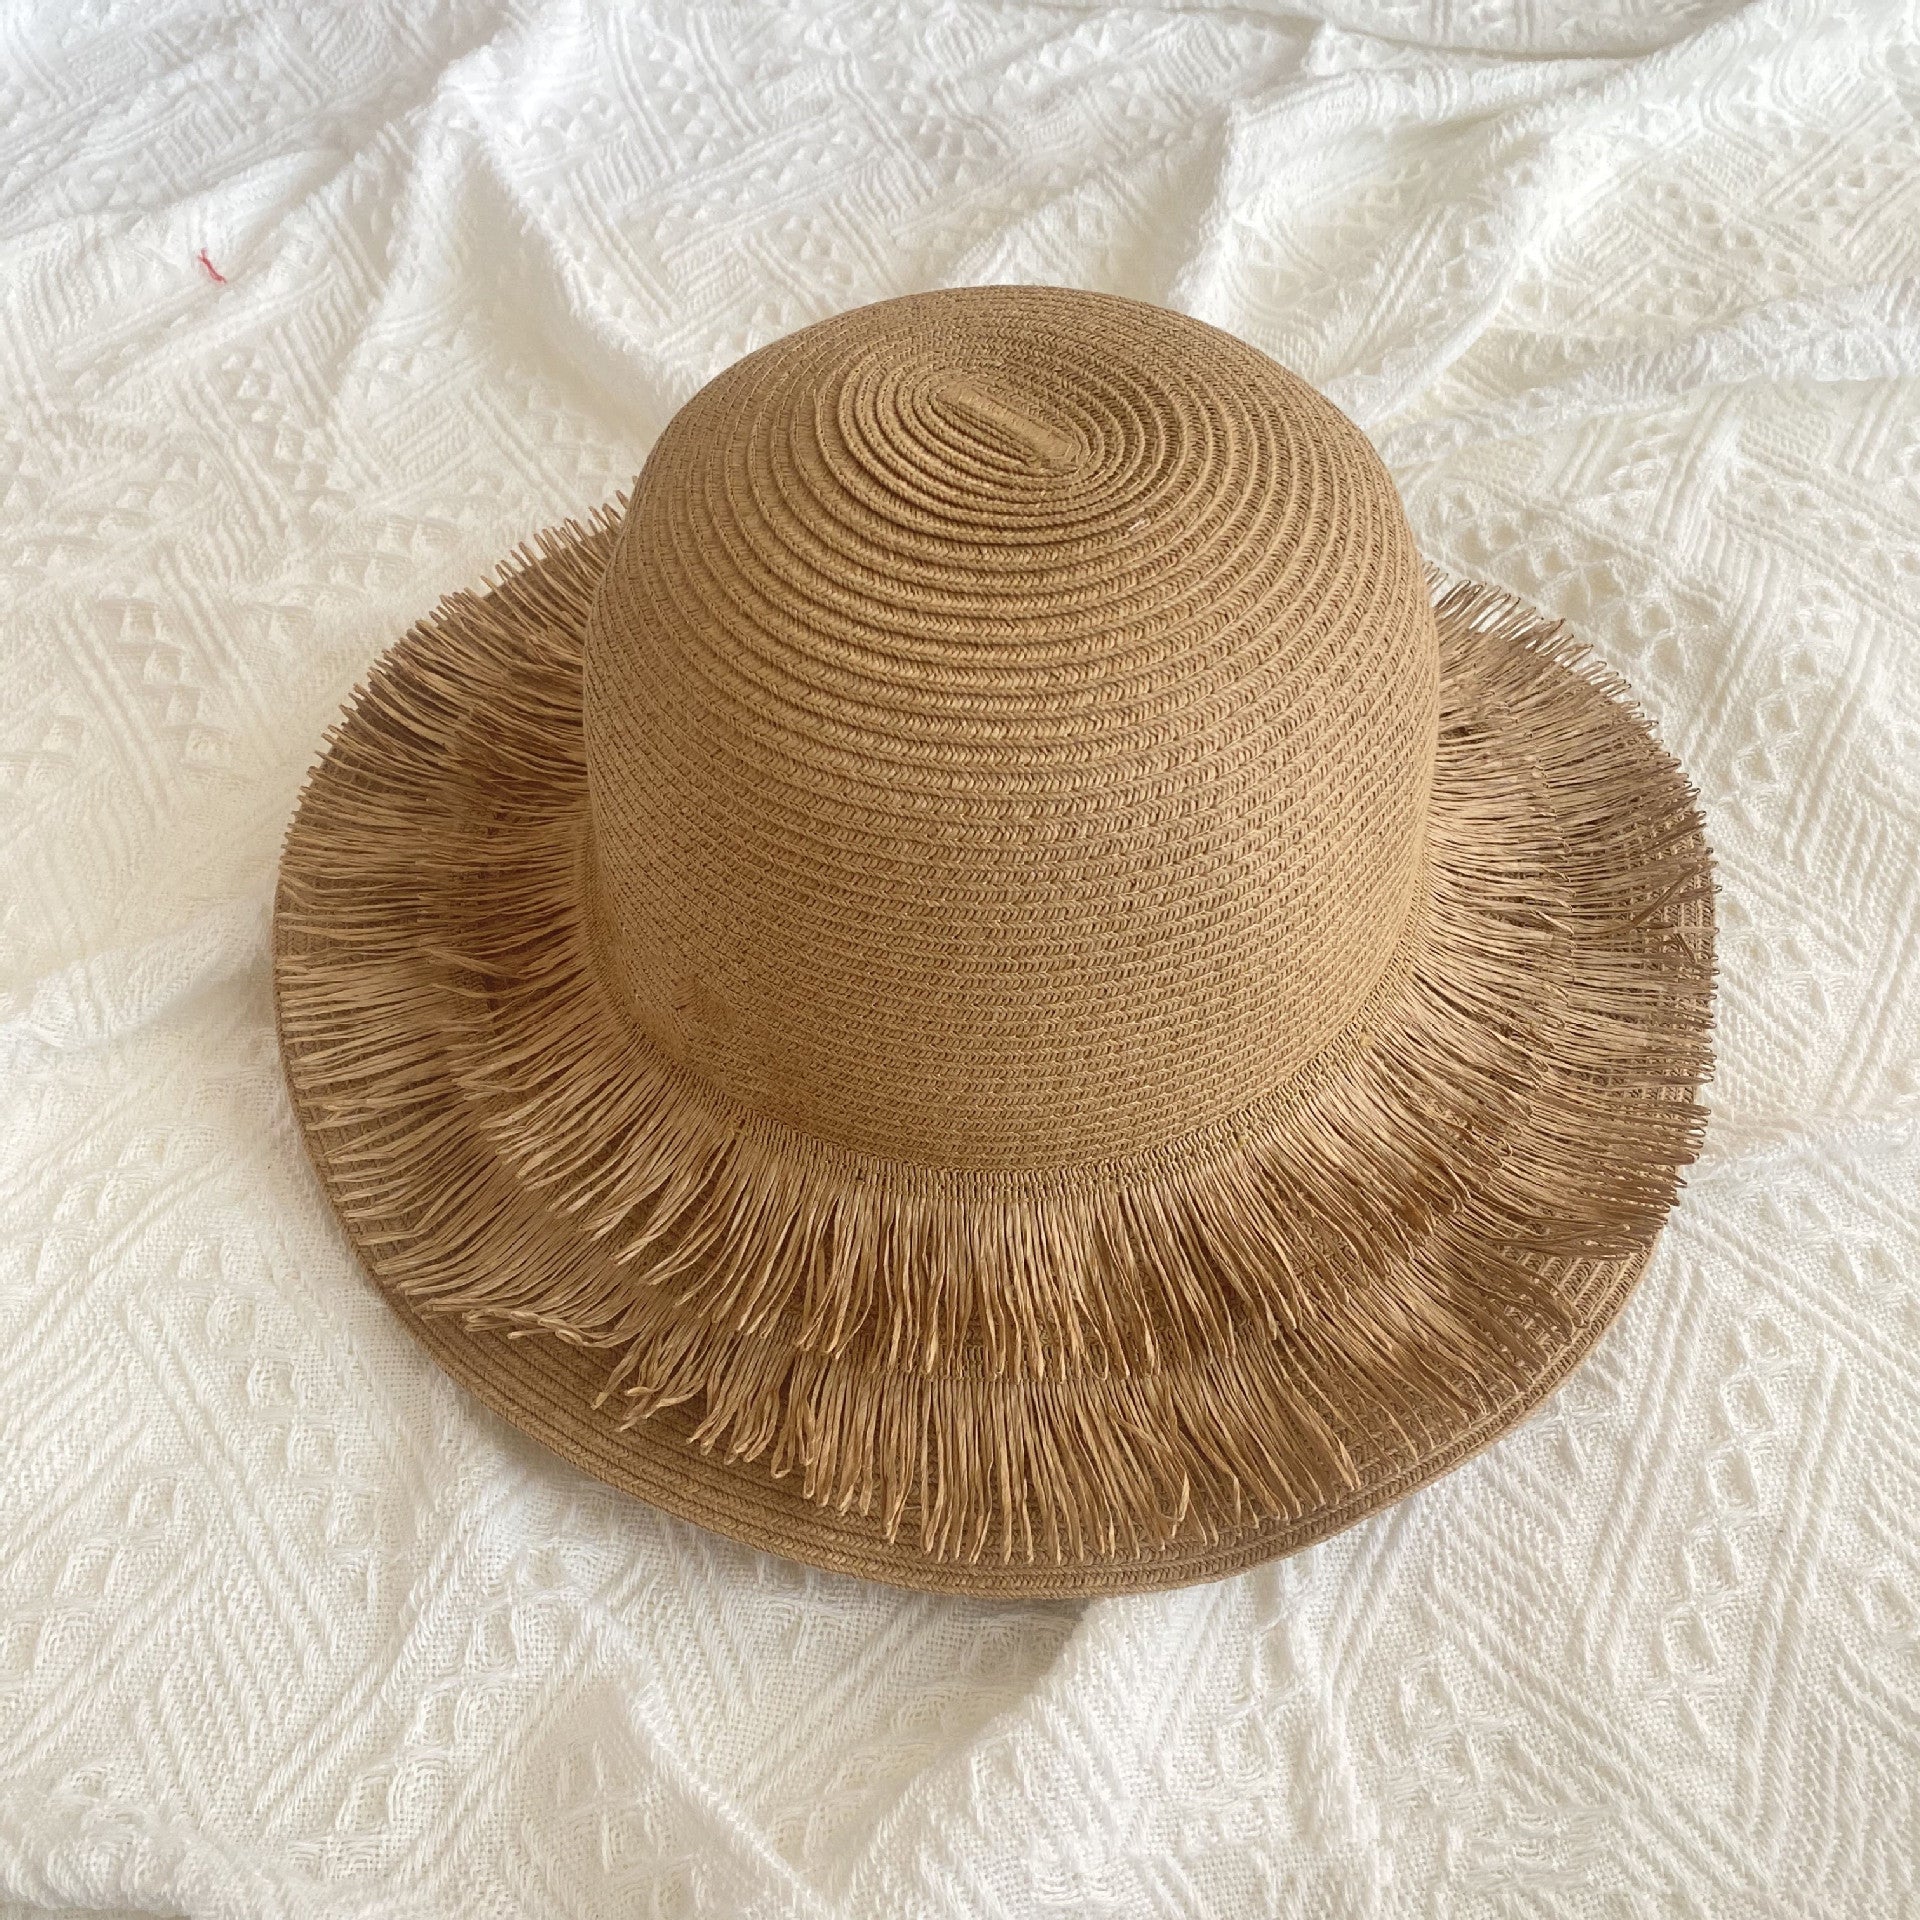 A Fringed Designed Seaside Beach Straw Hat by Beachy Cover Ups on top of a white bed.